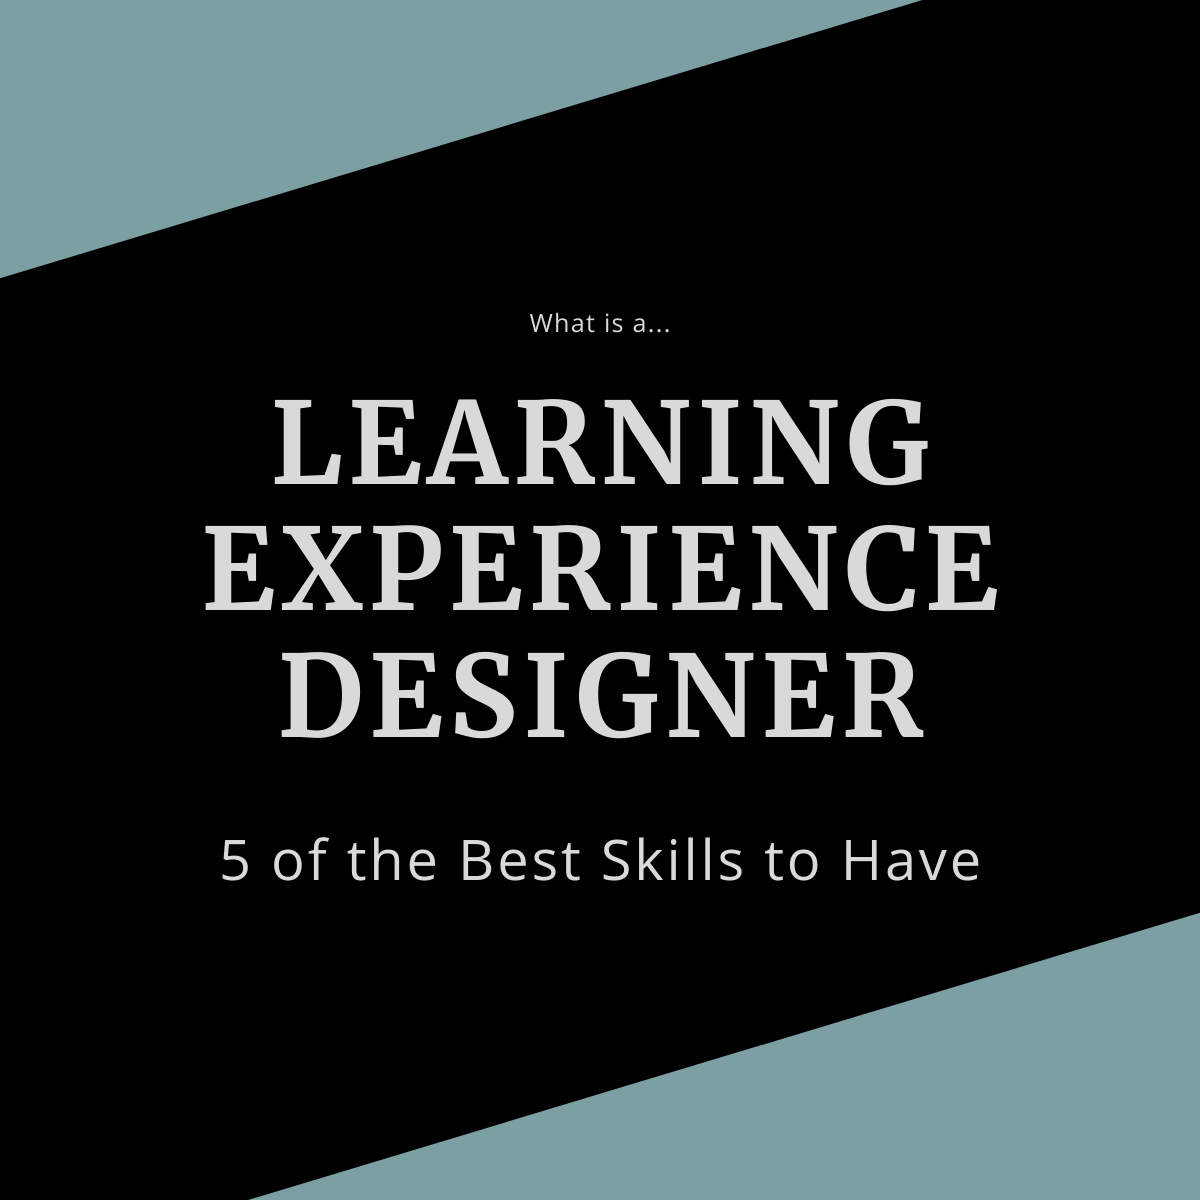 Learning Experience Designer: 5 of the Best Skills to Have